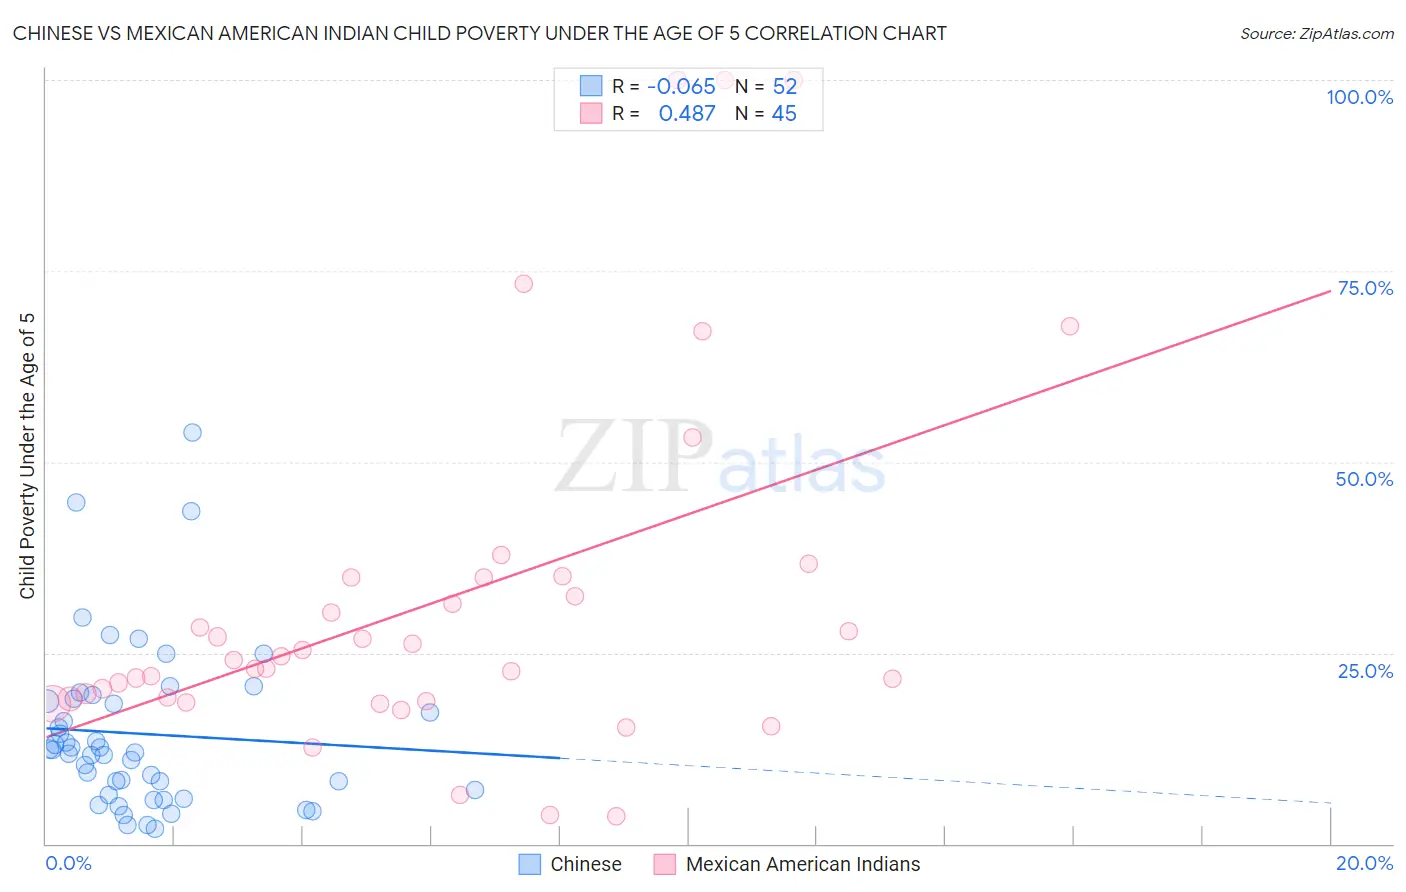 Chinese vs Mexican American Indian Child Poverty Under the Age of 5